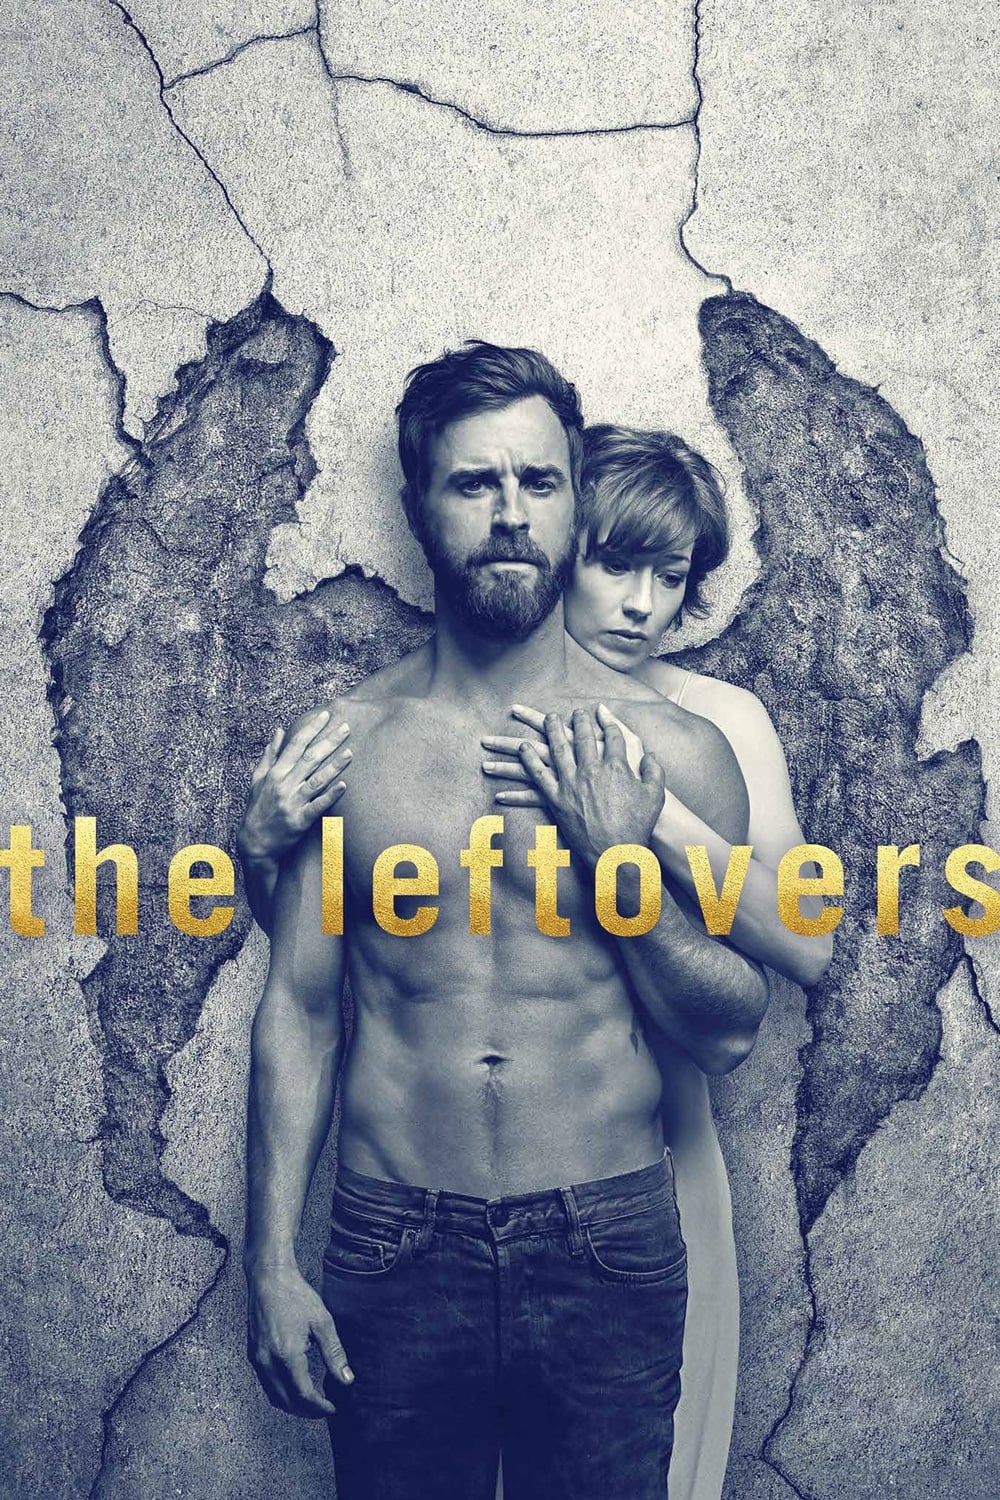 The Leftovers banner